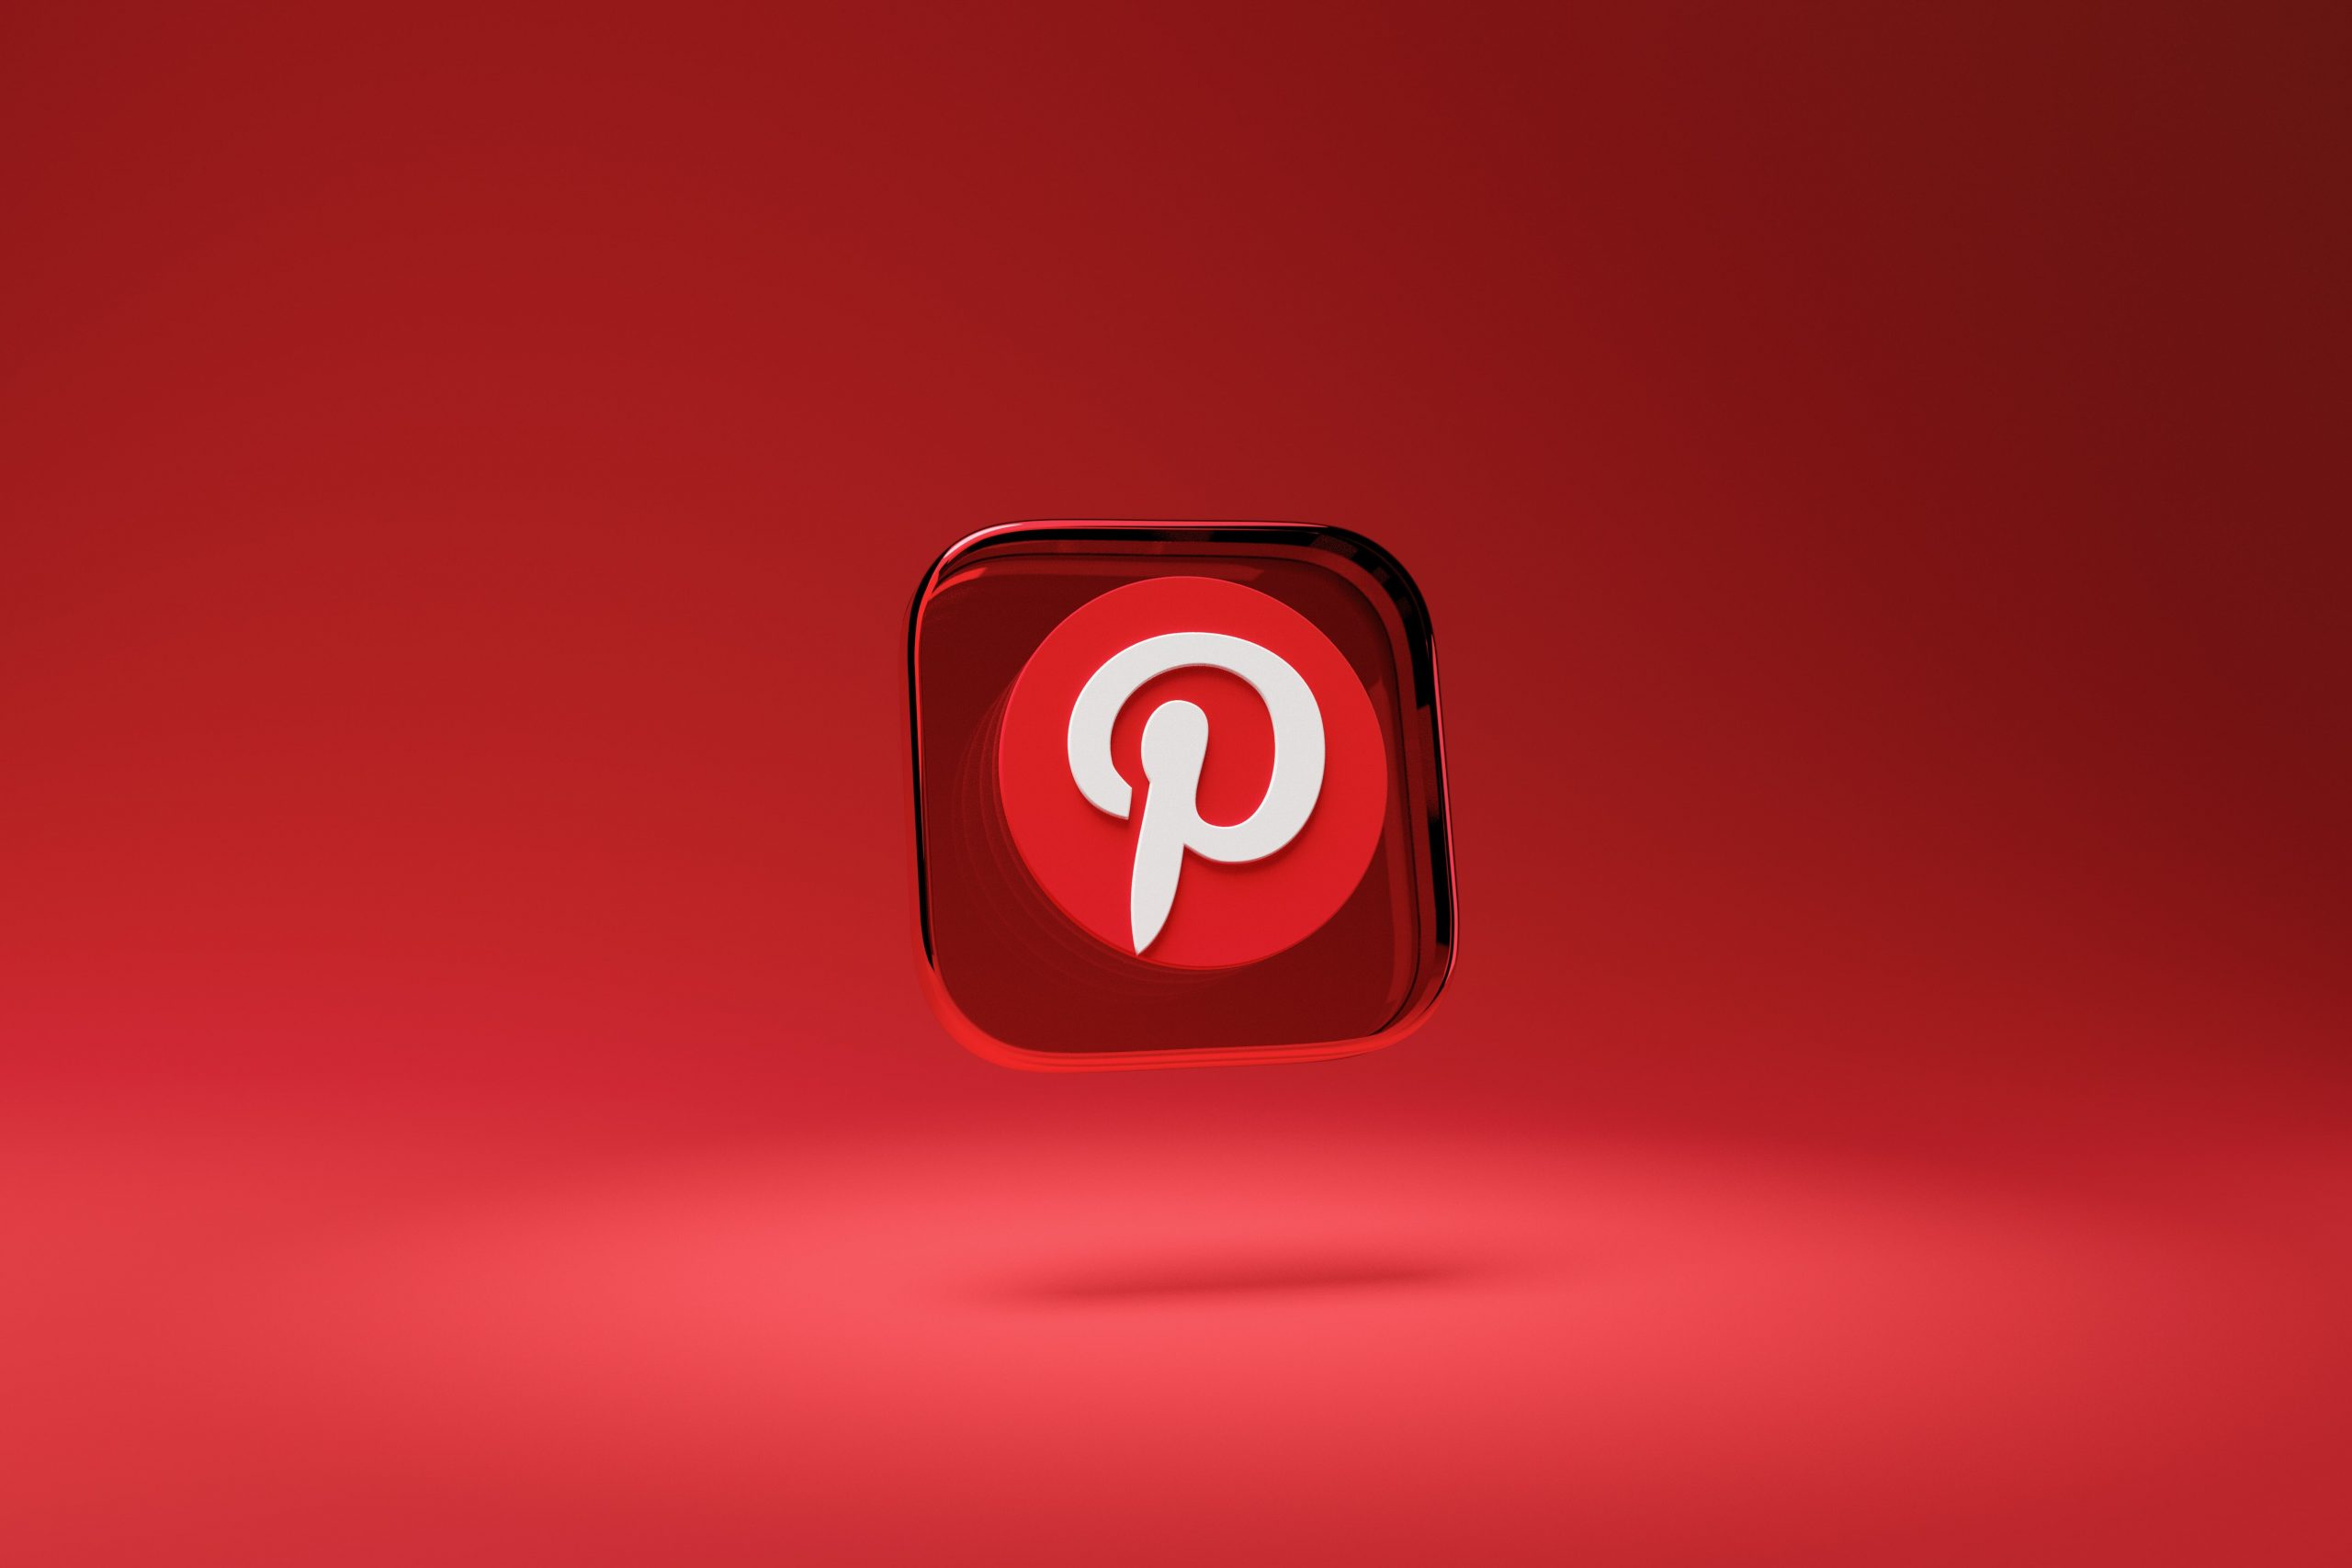 Pinterest, beyond being an image-sharing platform, fosters user engagement, making it a powerful tool for social media marketing in multifamily.